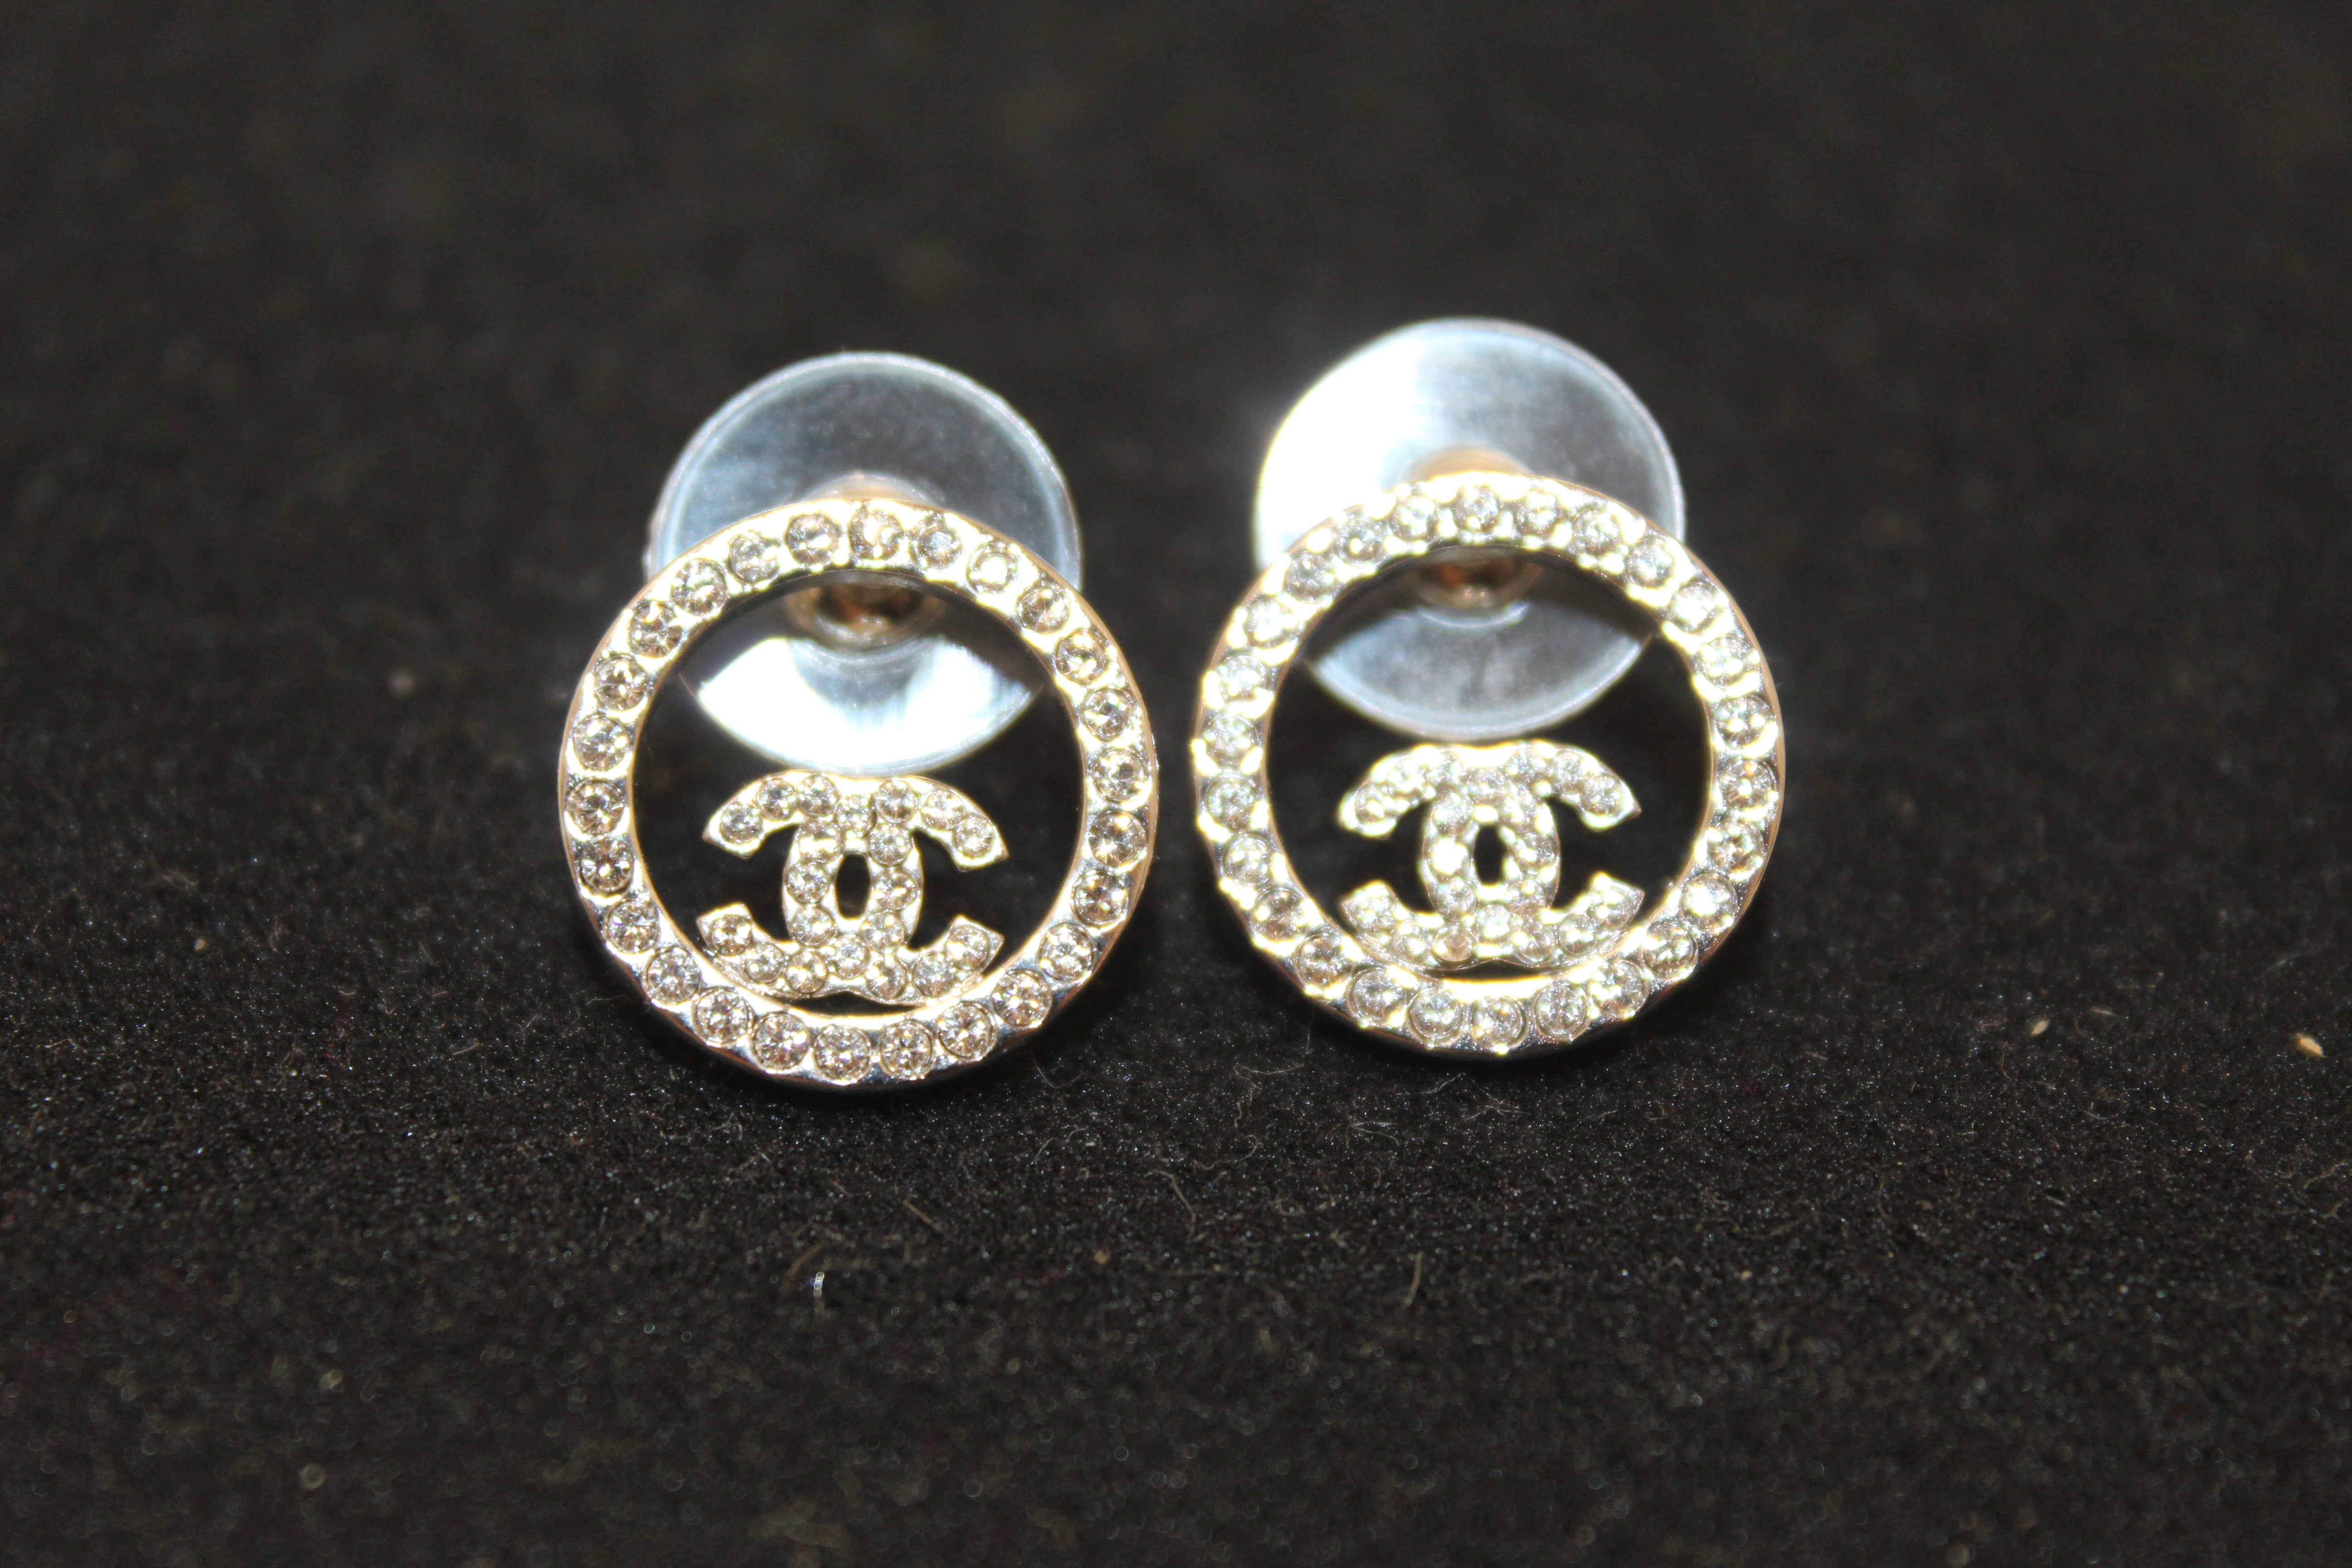 CHANEL Crystal CC Round Earrings Silver 335621